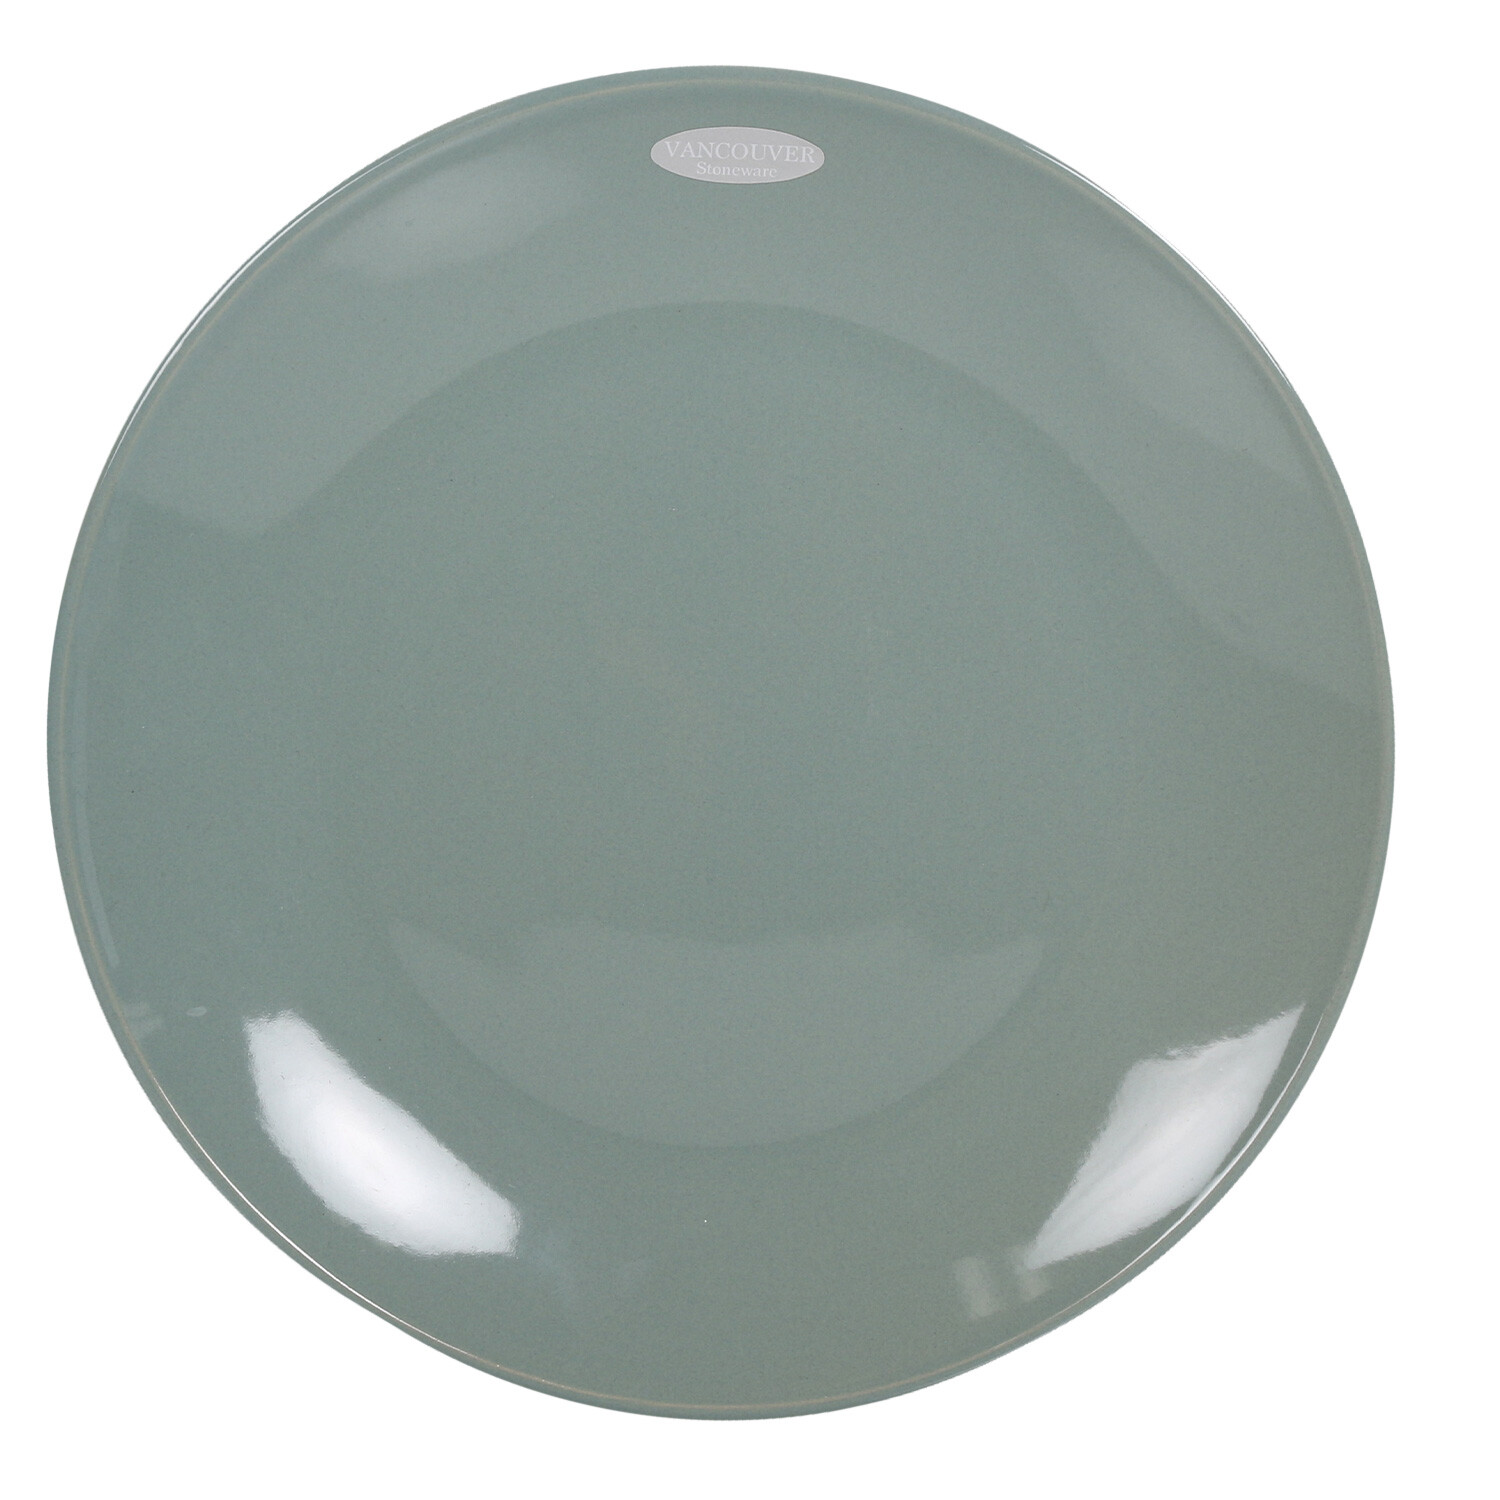 Vancouver 10.5" Dinner Plate - Green Image